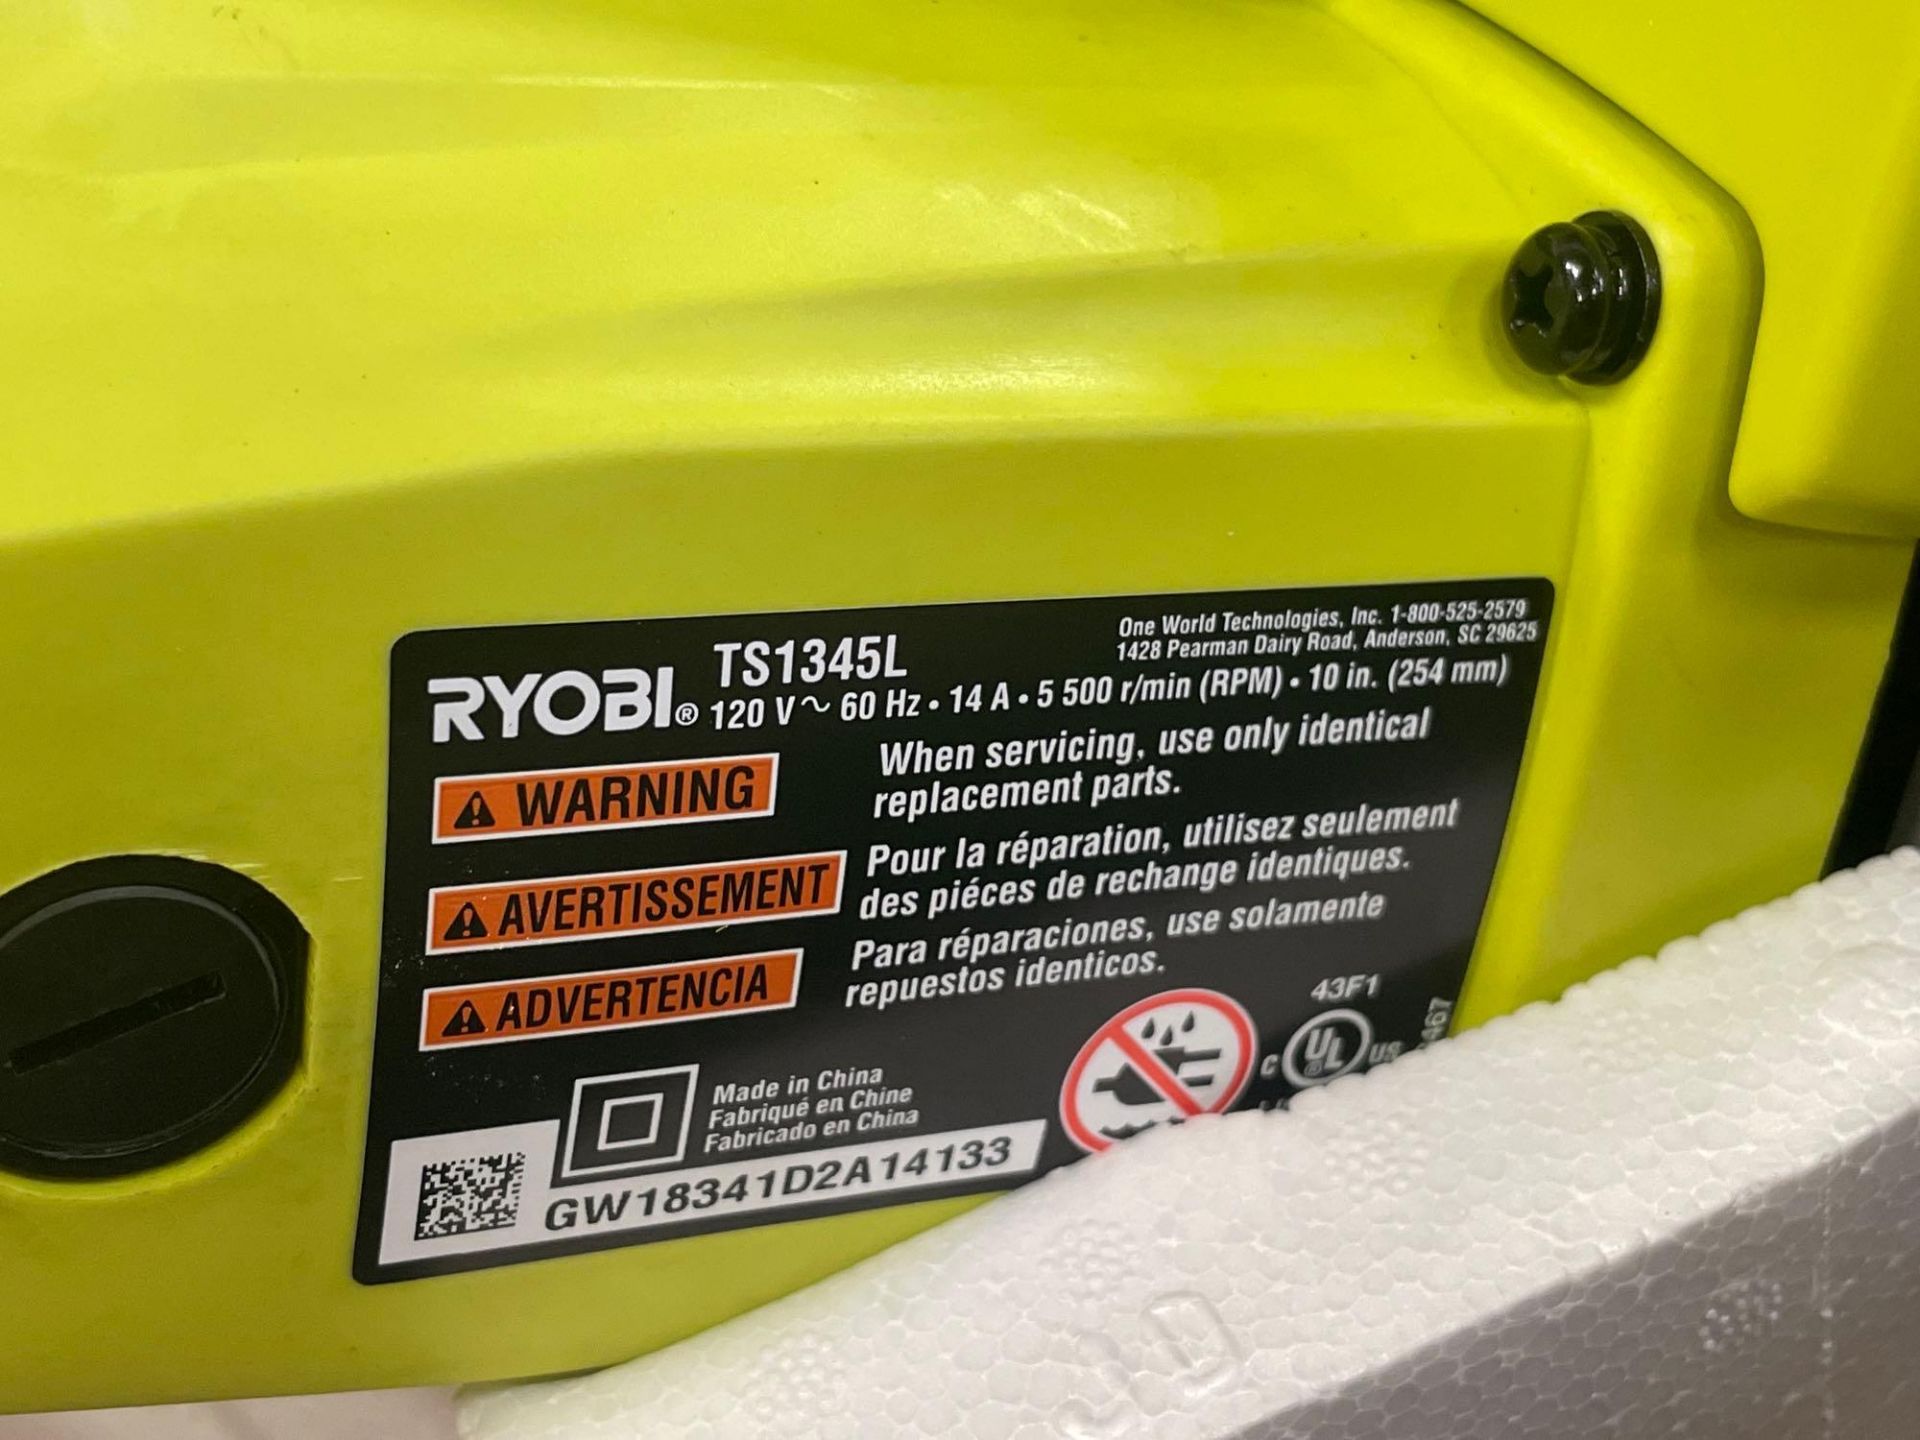 New Ryobi 10" Compound Miter Saw with Laser - Image 6 of 6